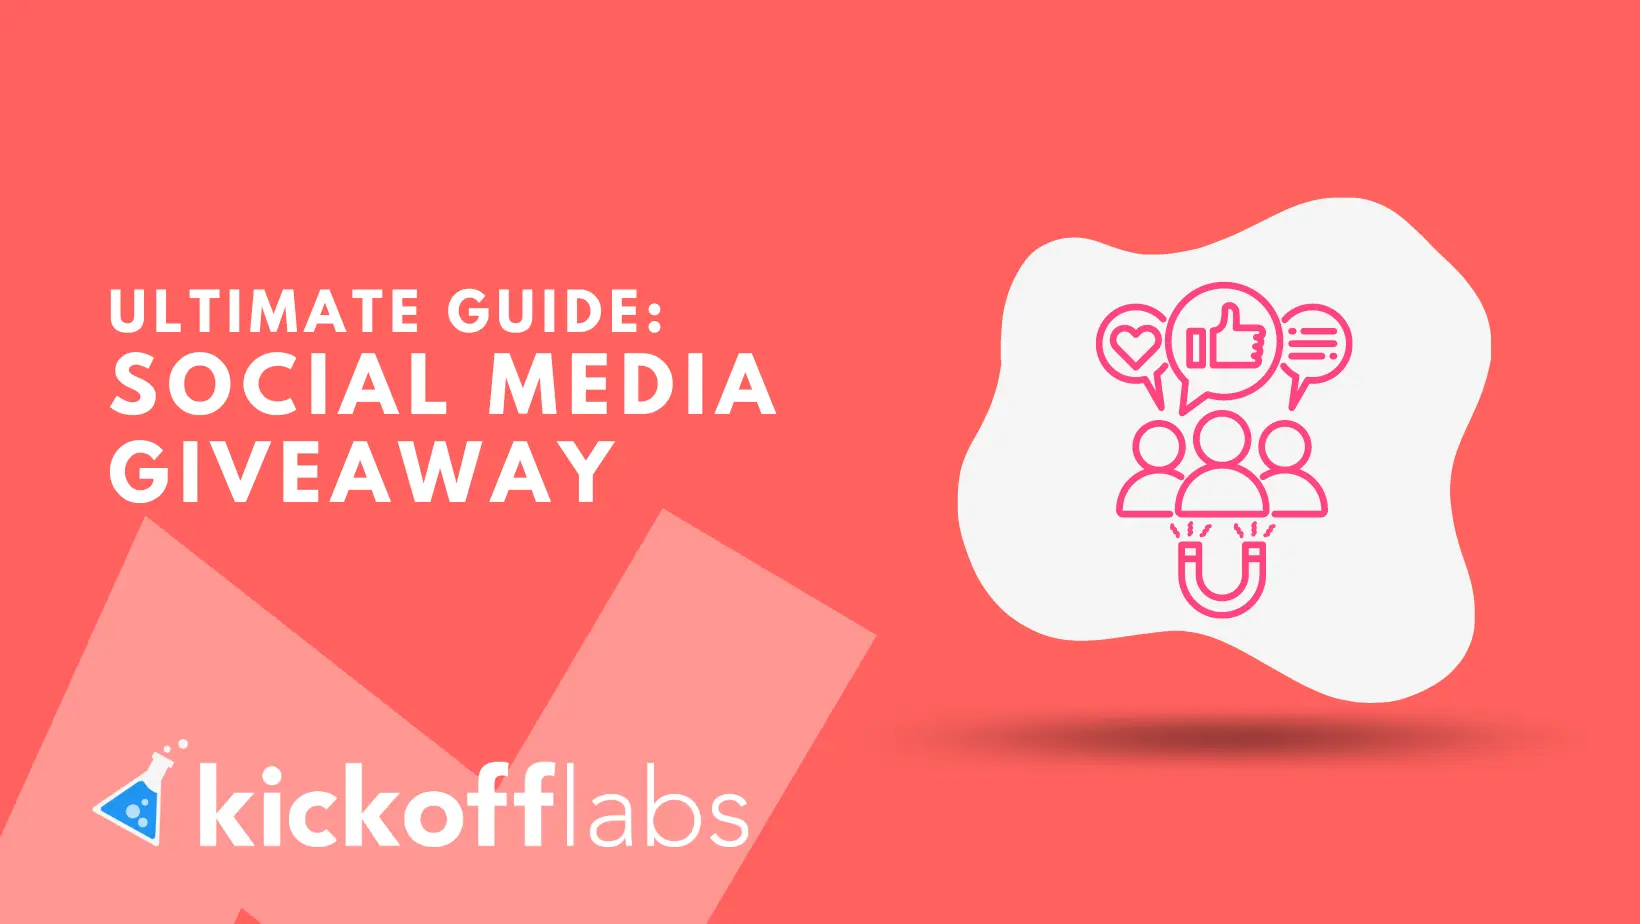 Social Media Giveaway Ideas - Ultimate Guide